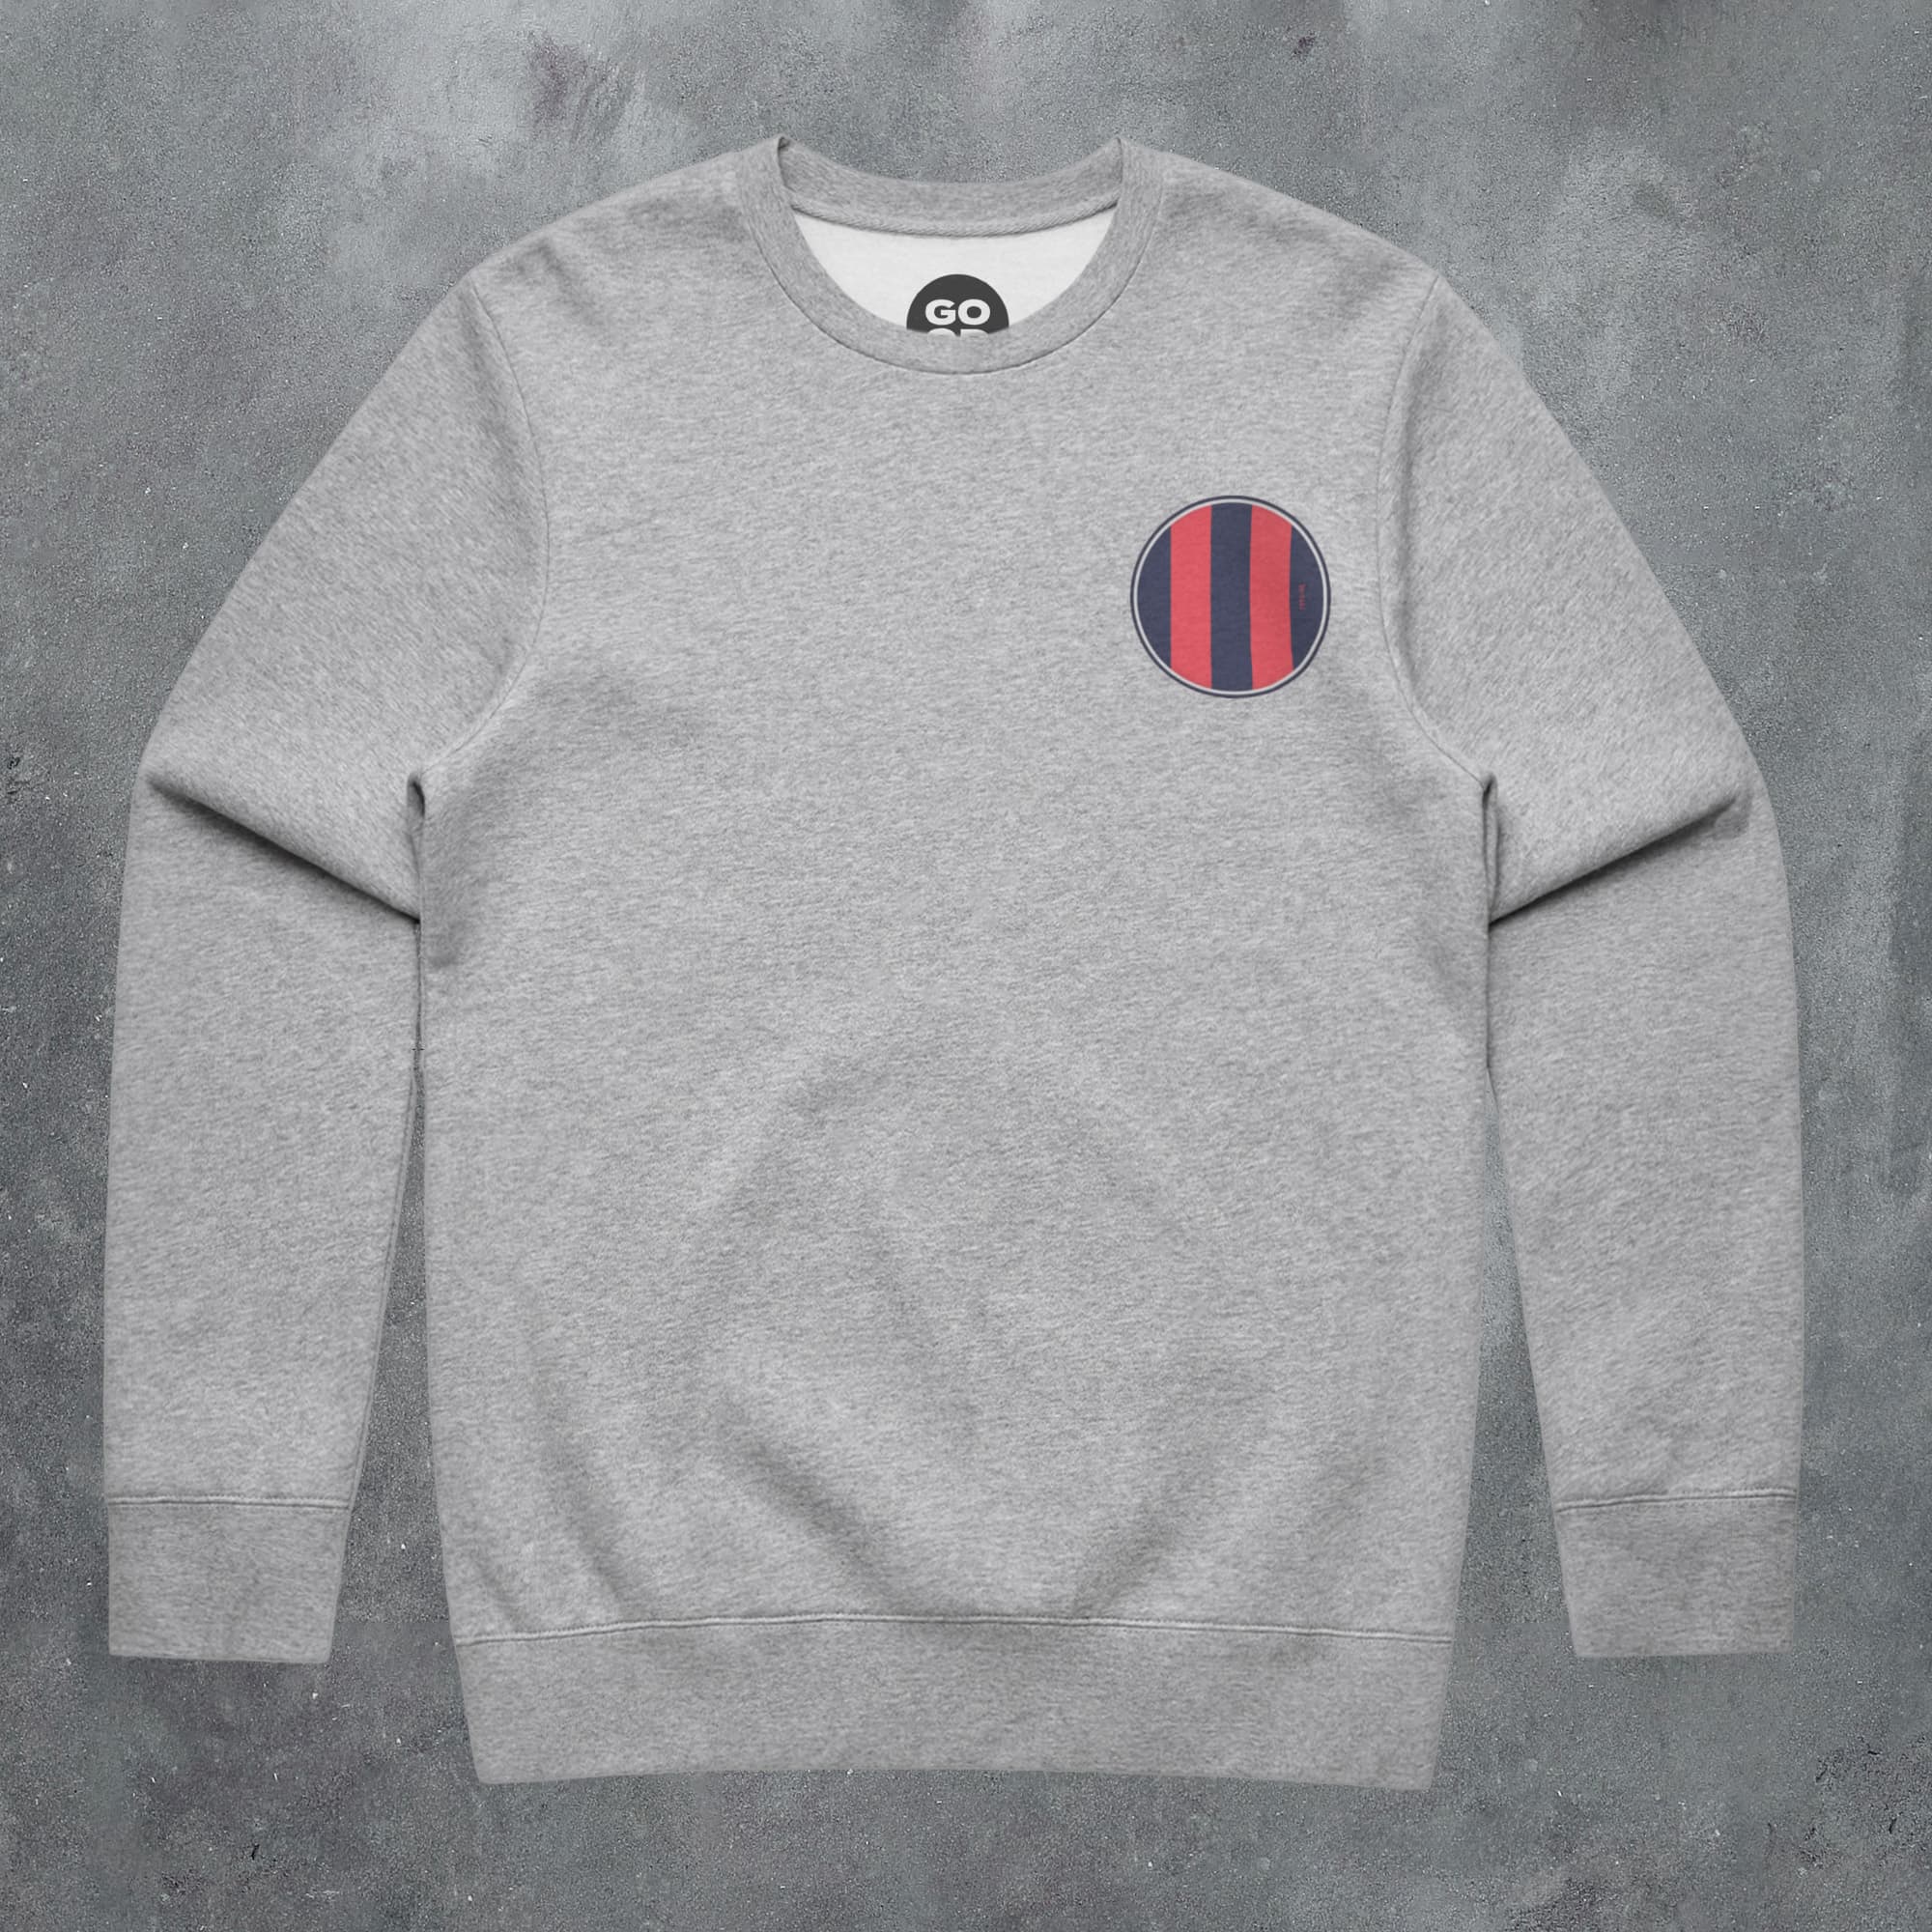 a grey sweatshirt with a red and blue stripe on the chest